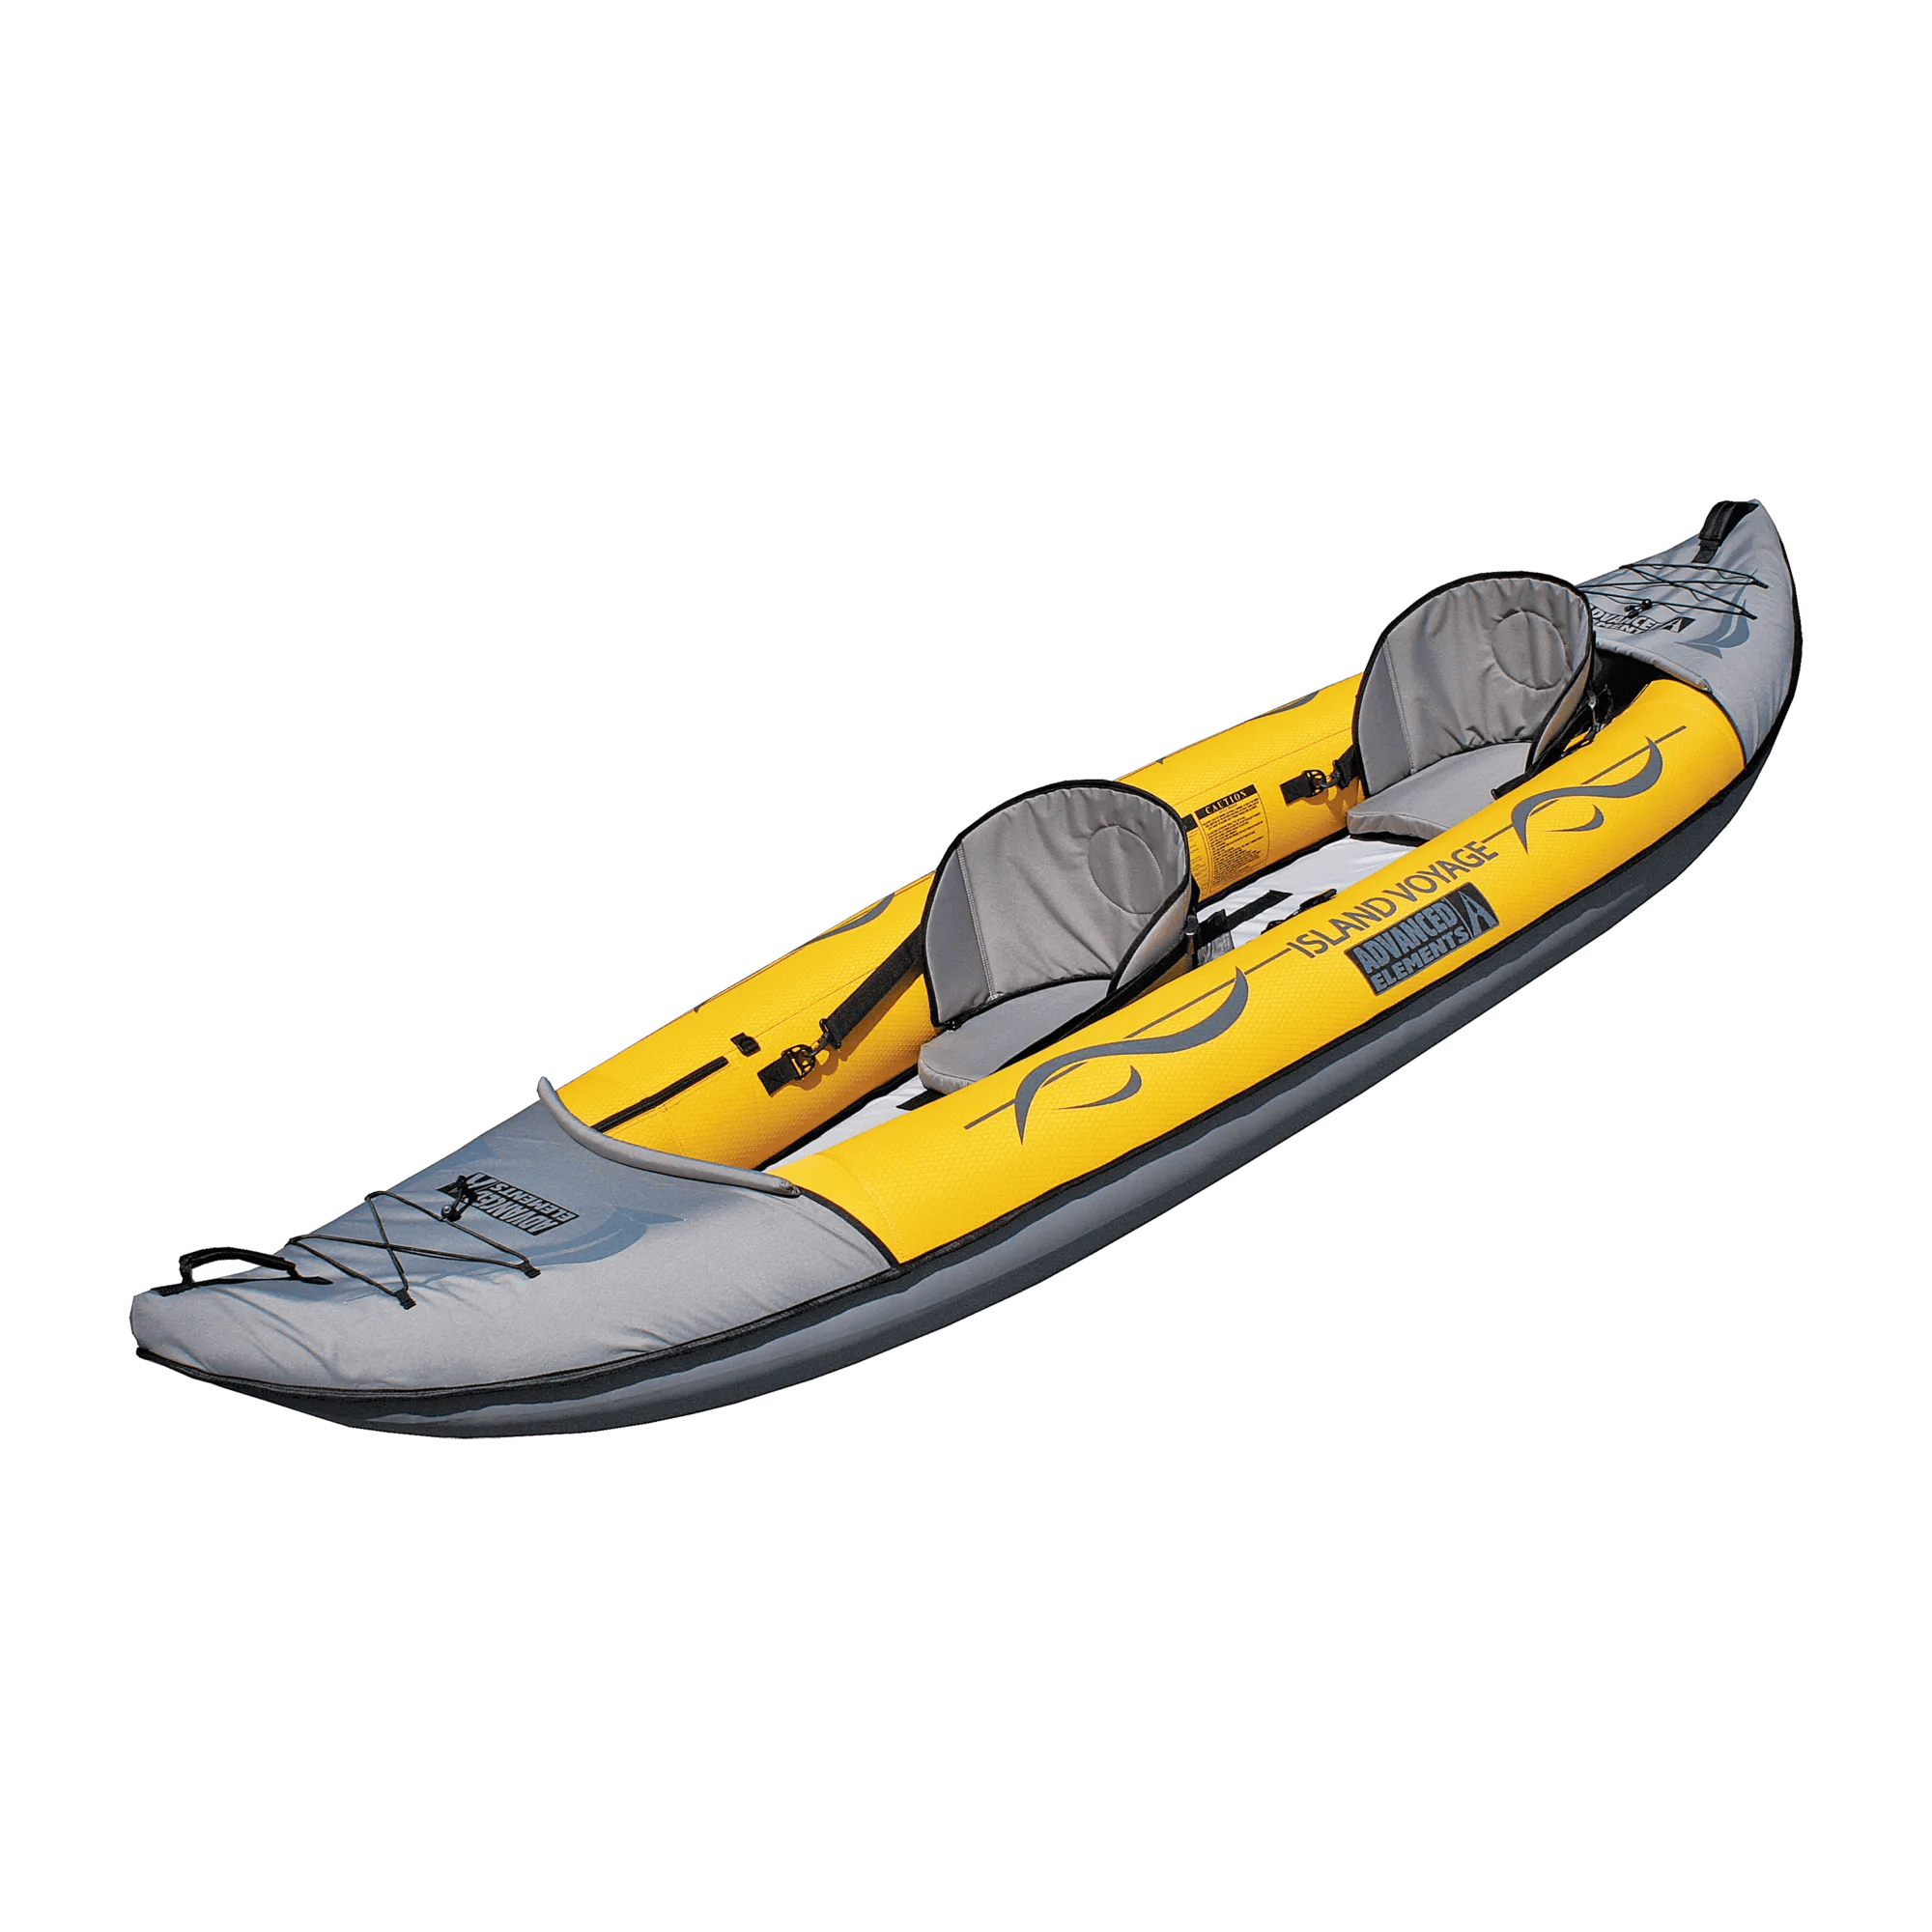 ADVANCED ELEMENTS - Island Voyage™ 2 Recreational Kayak Without Pump -  - AE3023-Y - ISO 